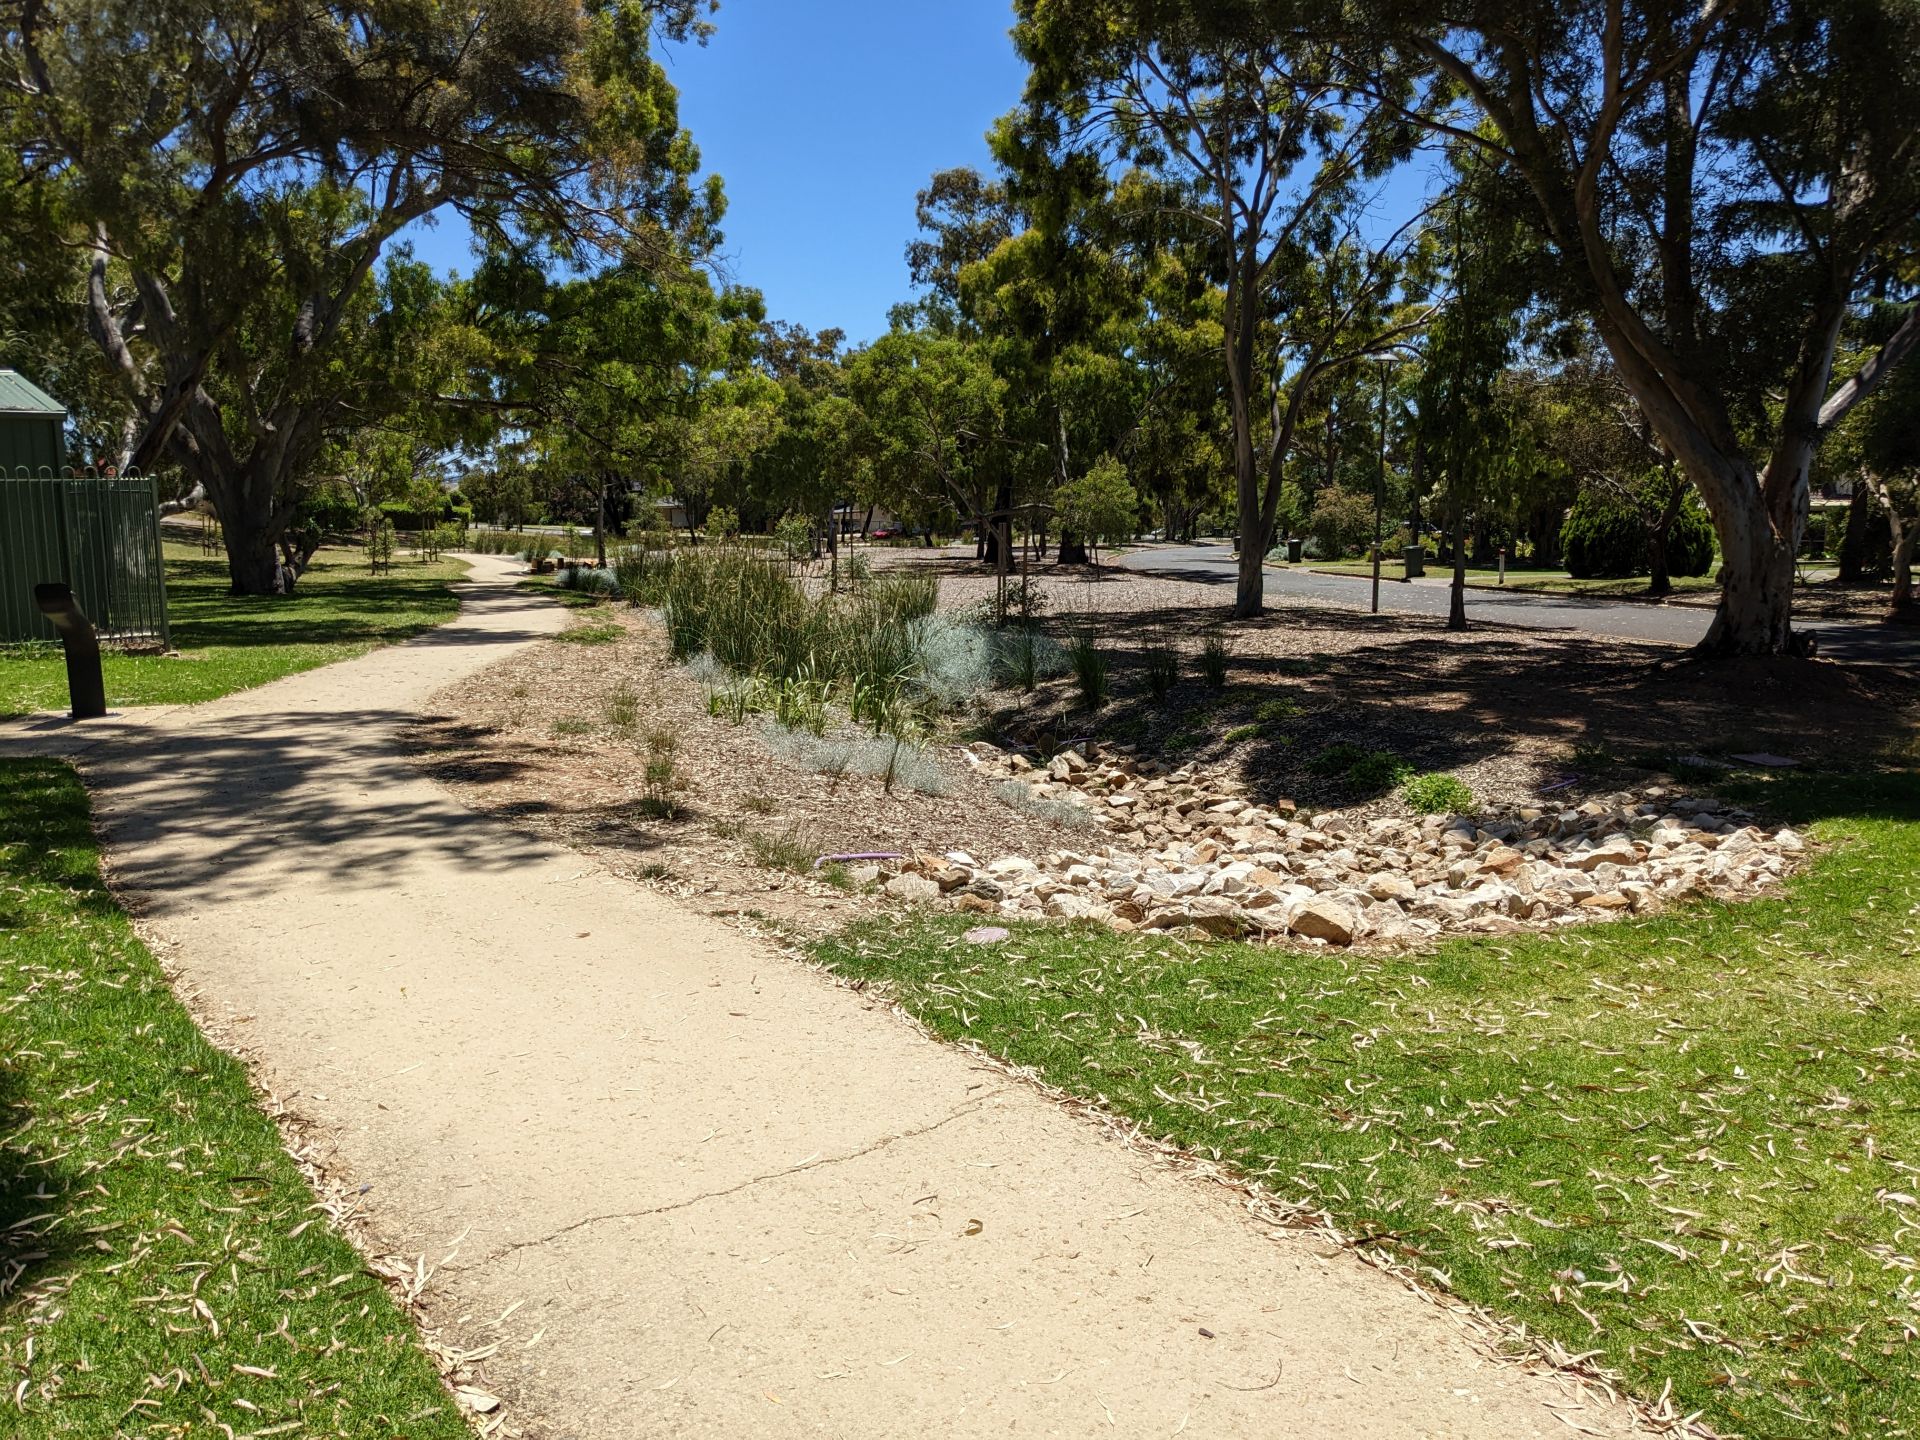 The walking path and plants in the swale at the Pasadena Biodiversity Corridor